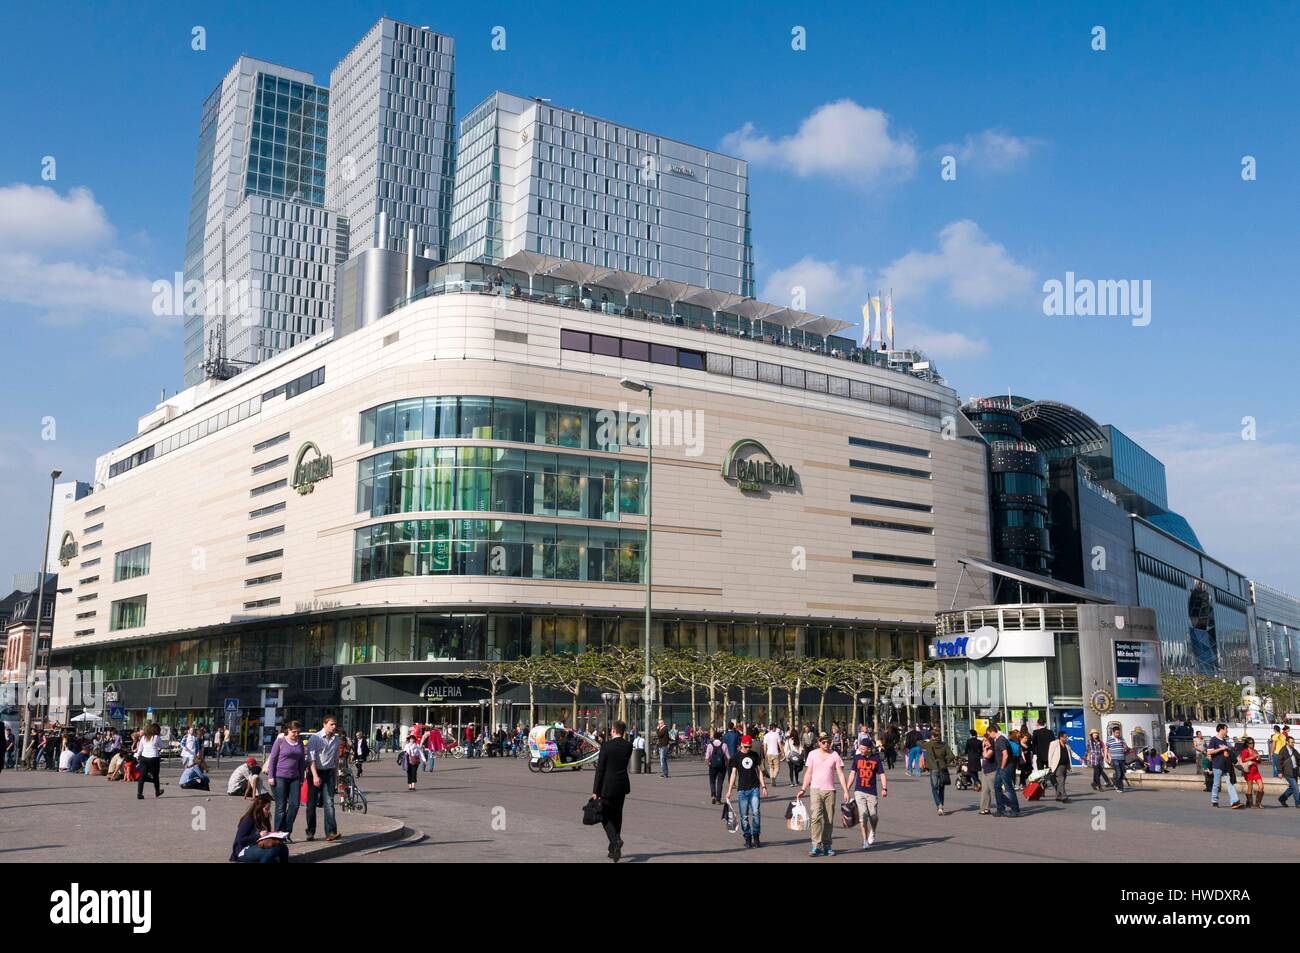 Germany, Hesse, Frankfurt am Main, Hauptwache and Kaufhof shopping center, Palais Quartier towers and Jumeirah Frankfurt Hotel in the background Stock Photo